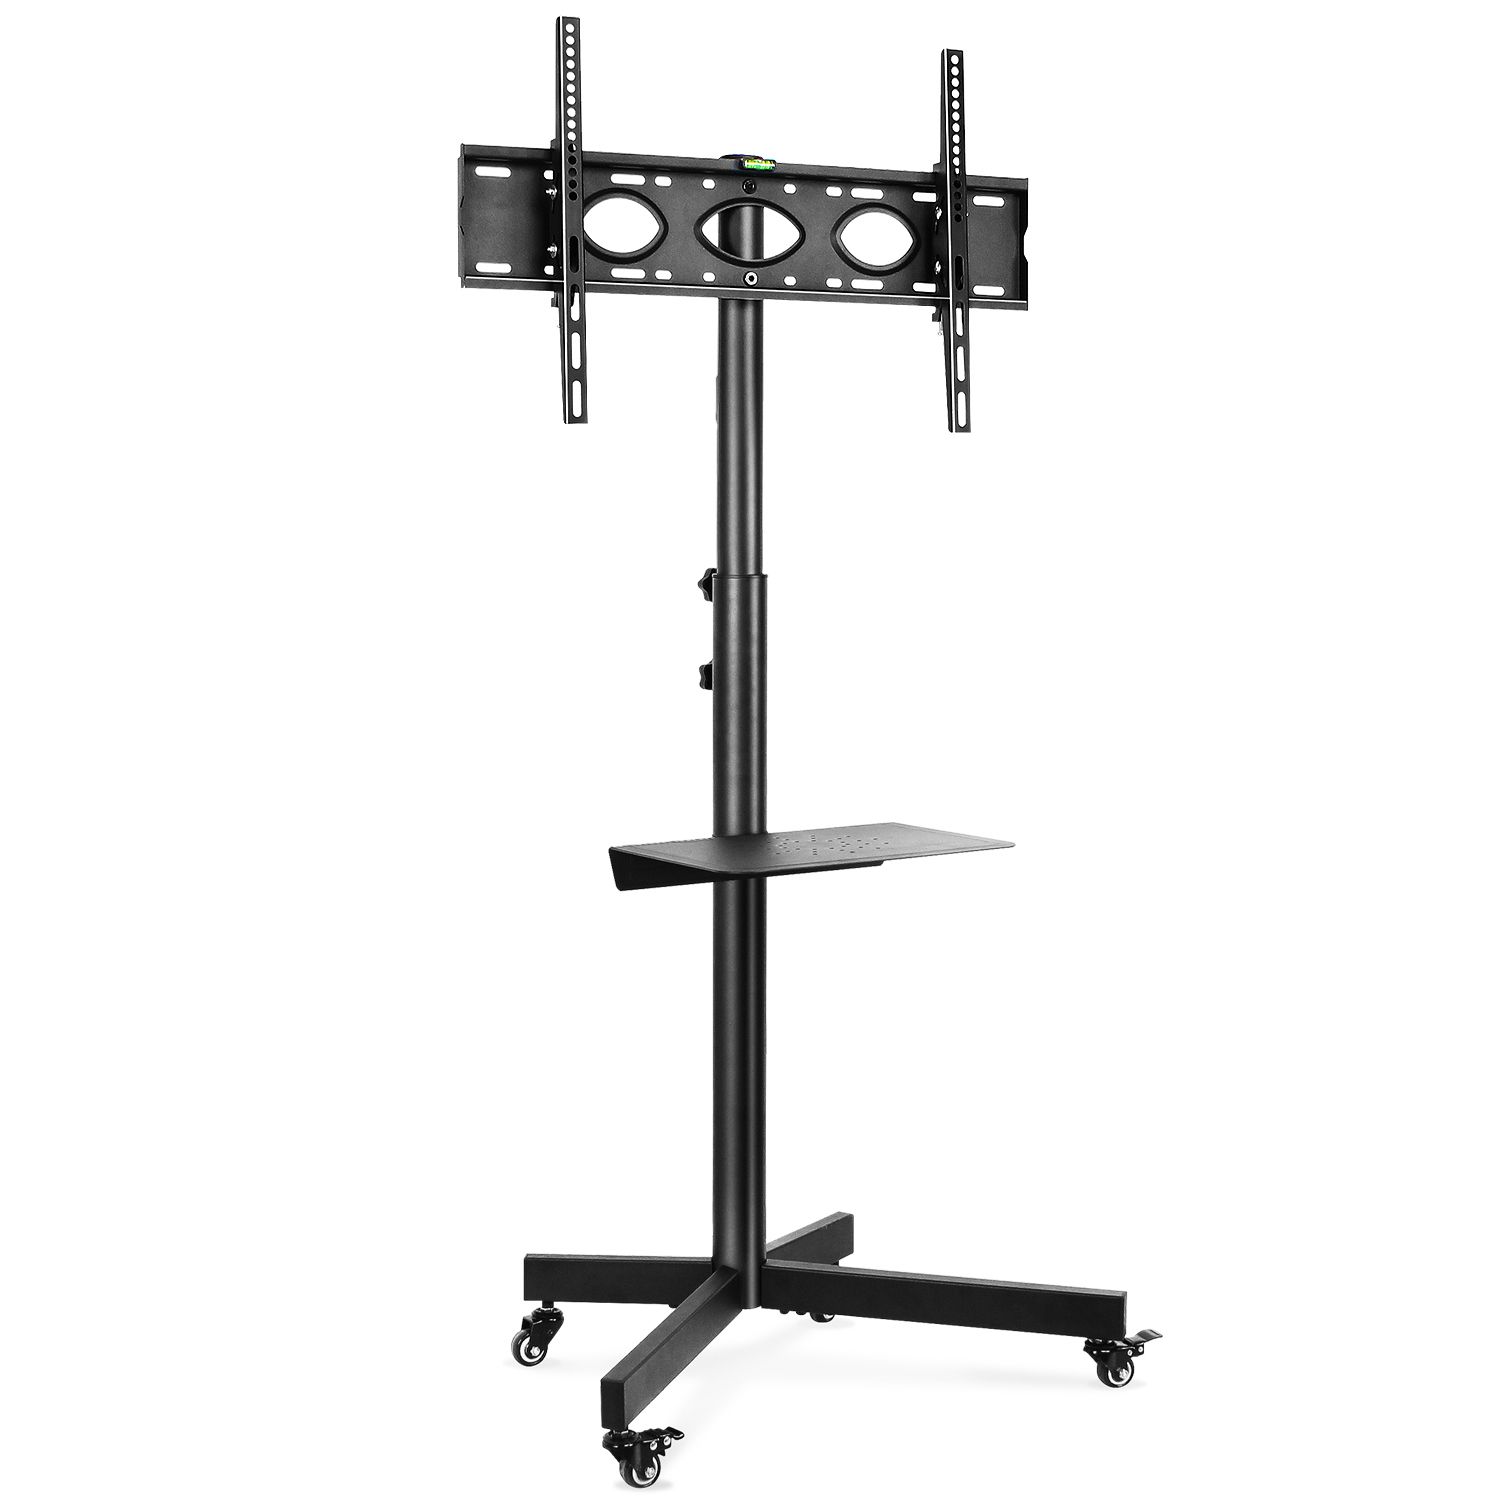 5rcom Mobile Adjustable Floor Tv Stand Cart For Tvs Up To Pertaining To Rolling Tv Cart Mobile Tv Stands With Lockable Wheels (View 8 of 15)